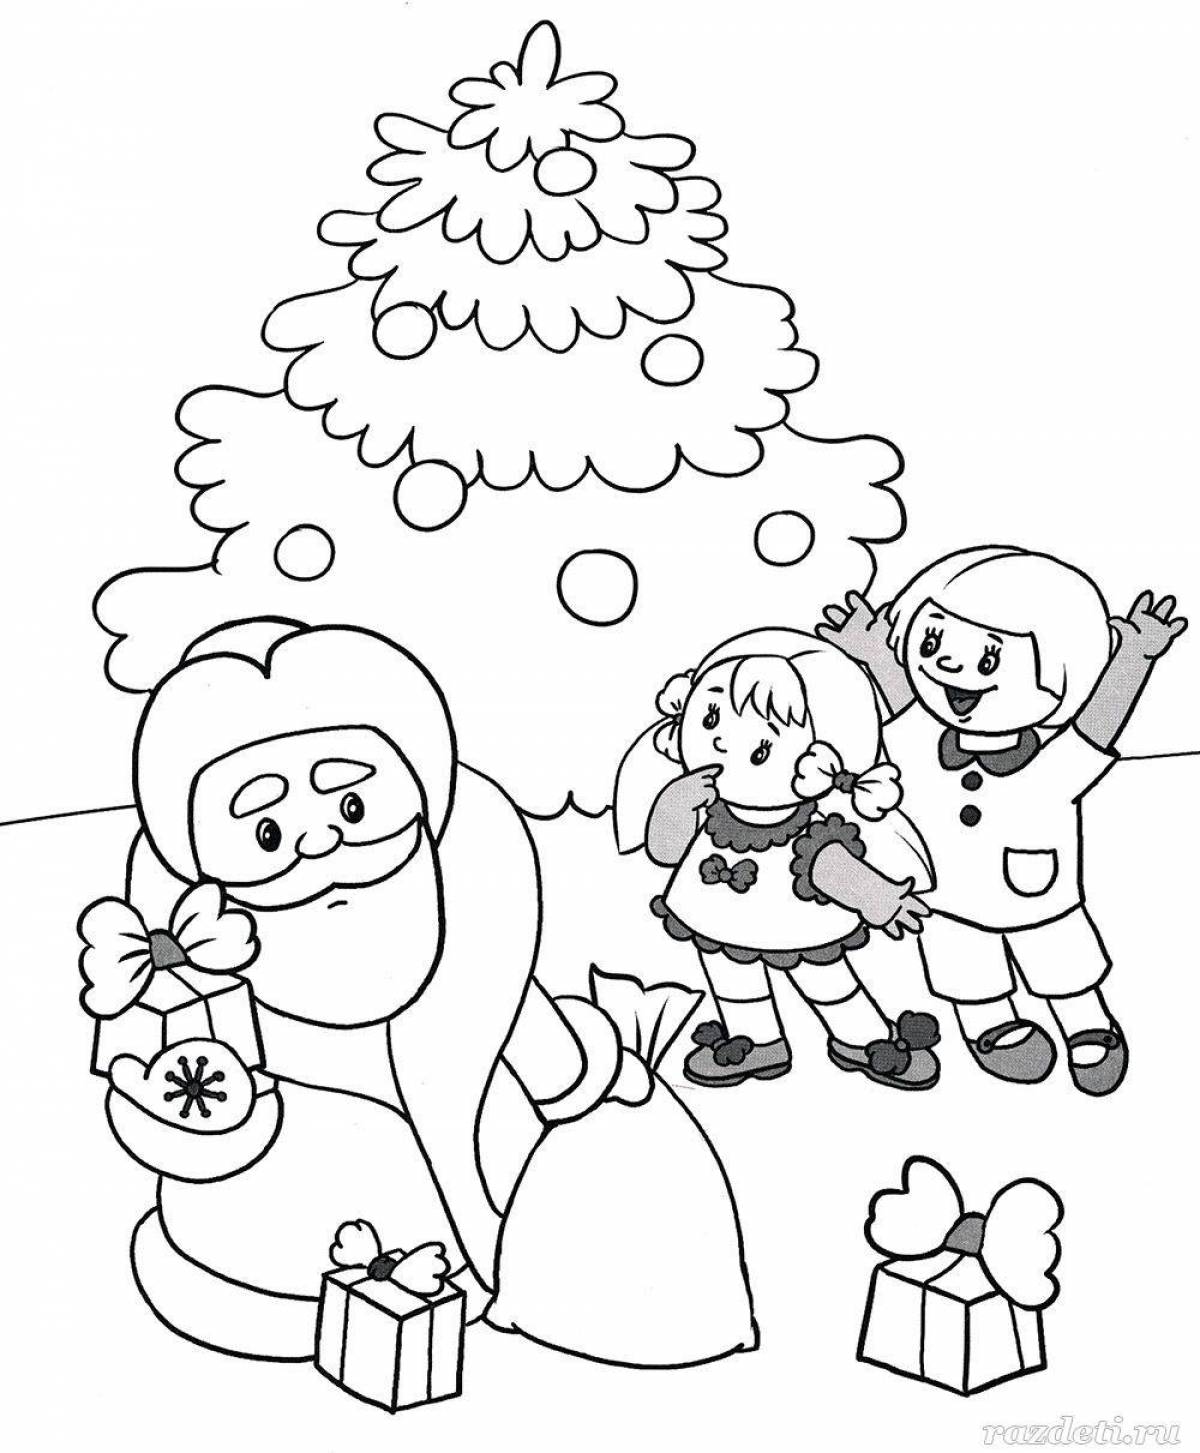 Wonderful winter coloring book for children 4-5 years old